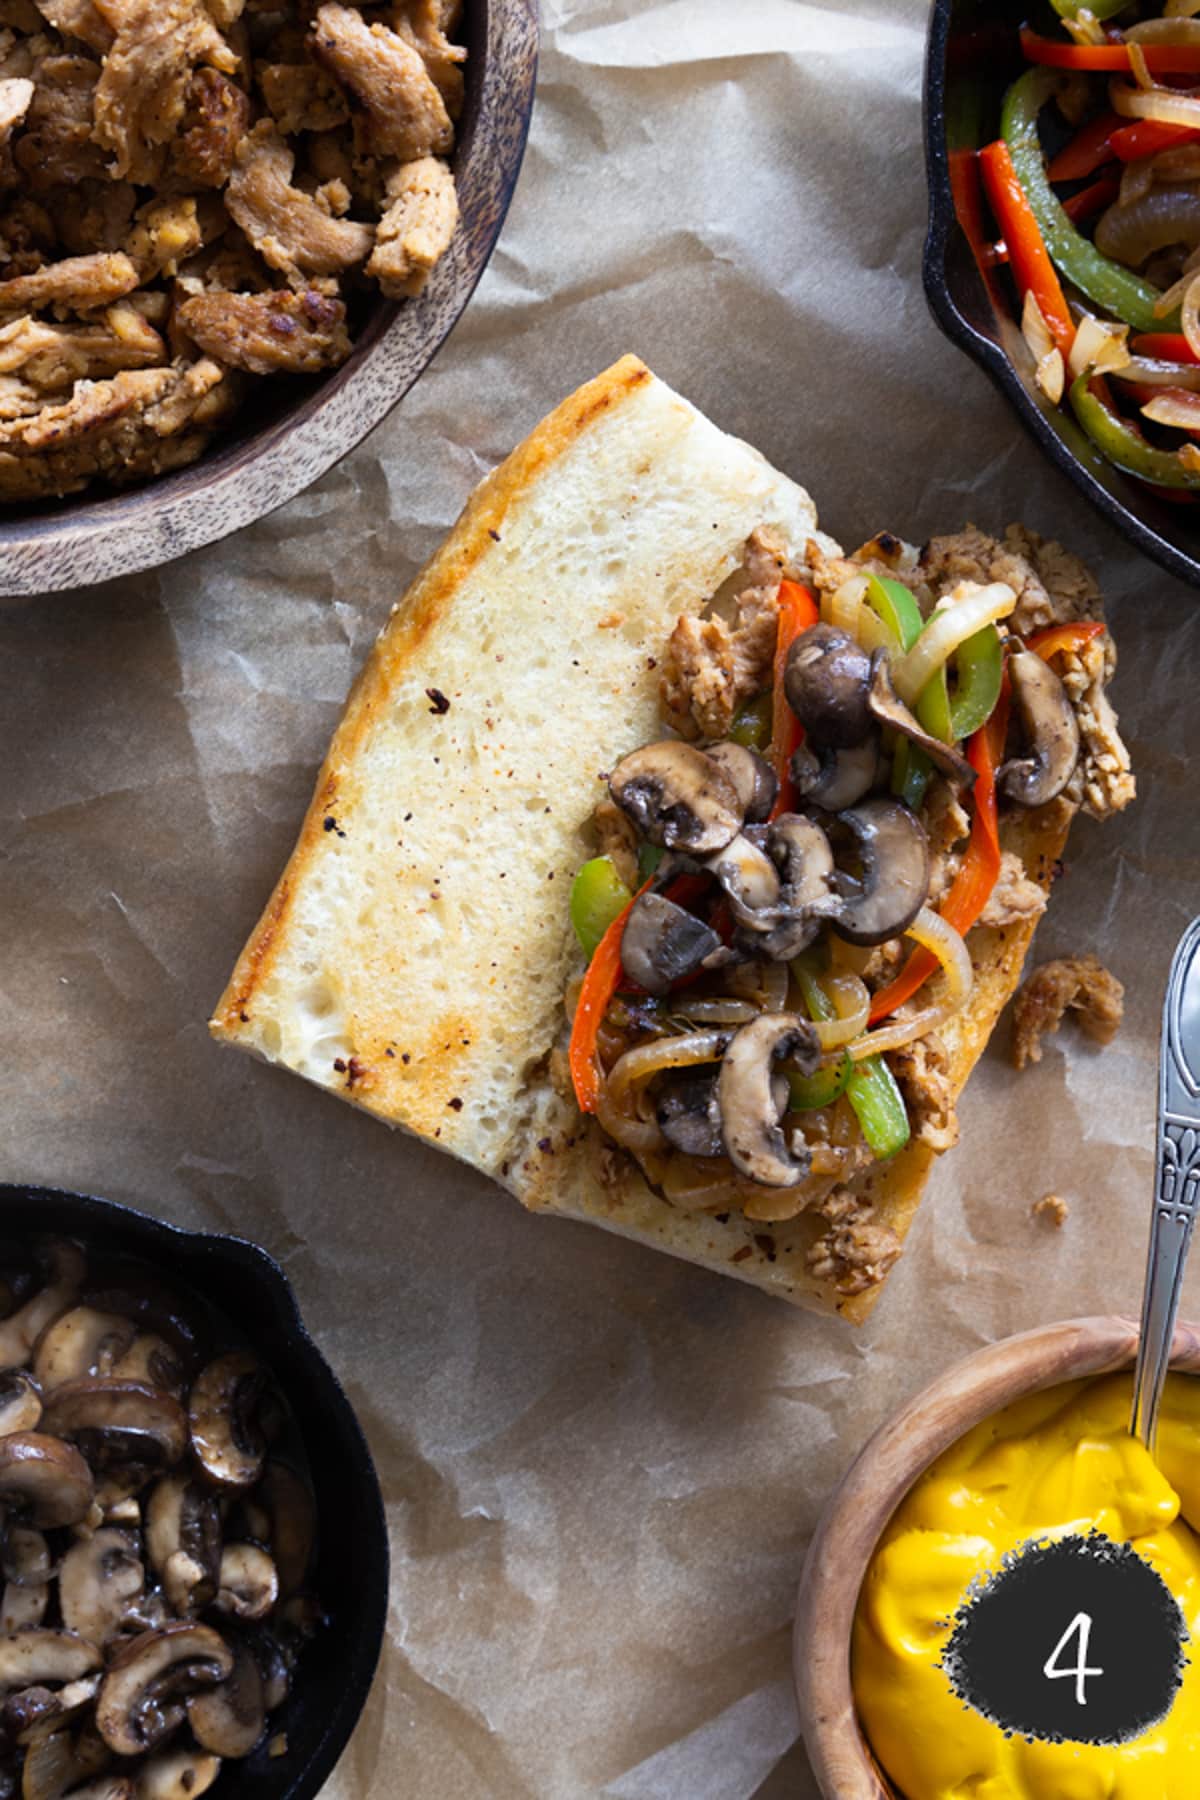 A sandwich with mushrooms, onions, and peppers.